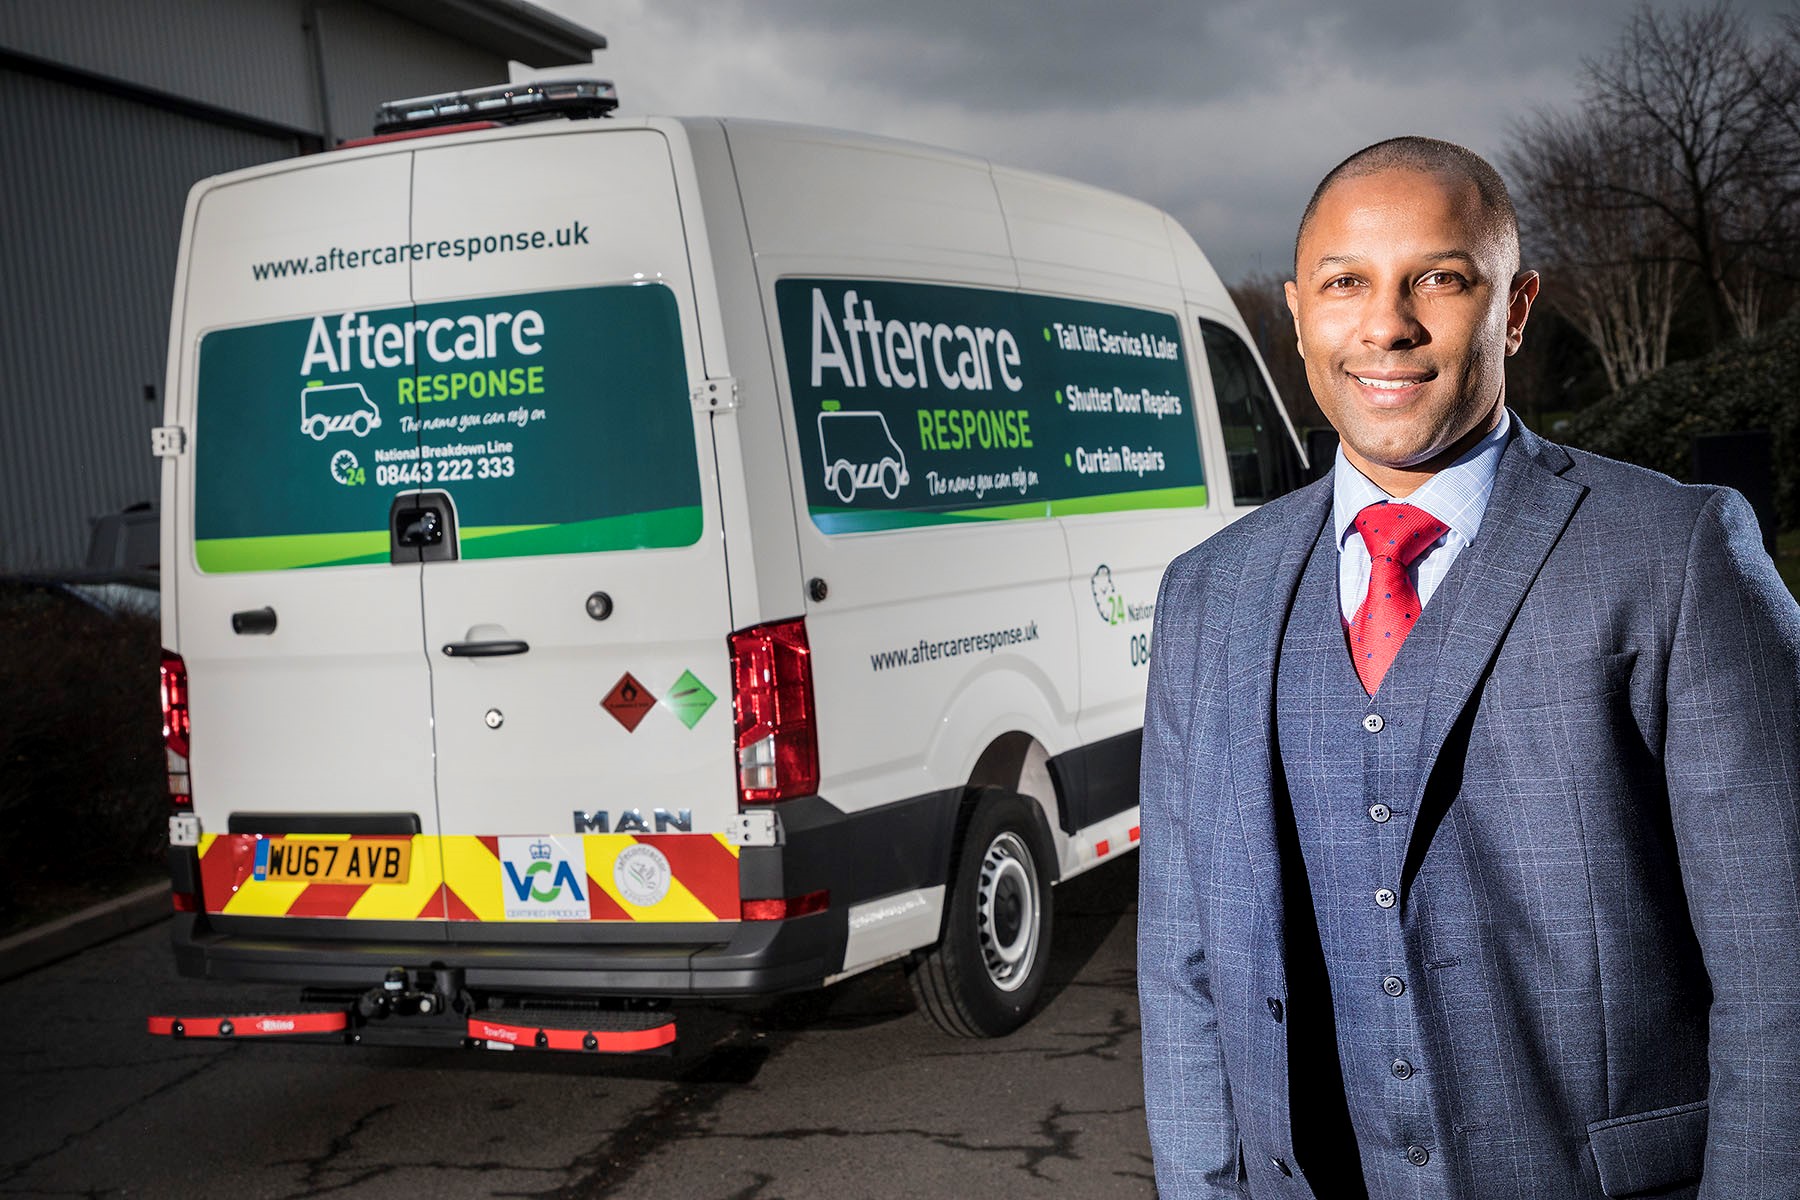 Dean spearheads Aftercare Response’s drive for new business